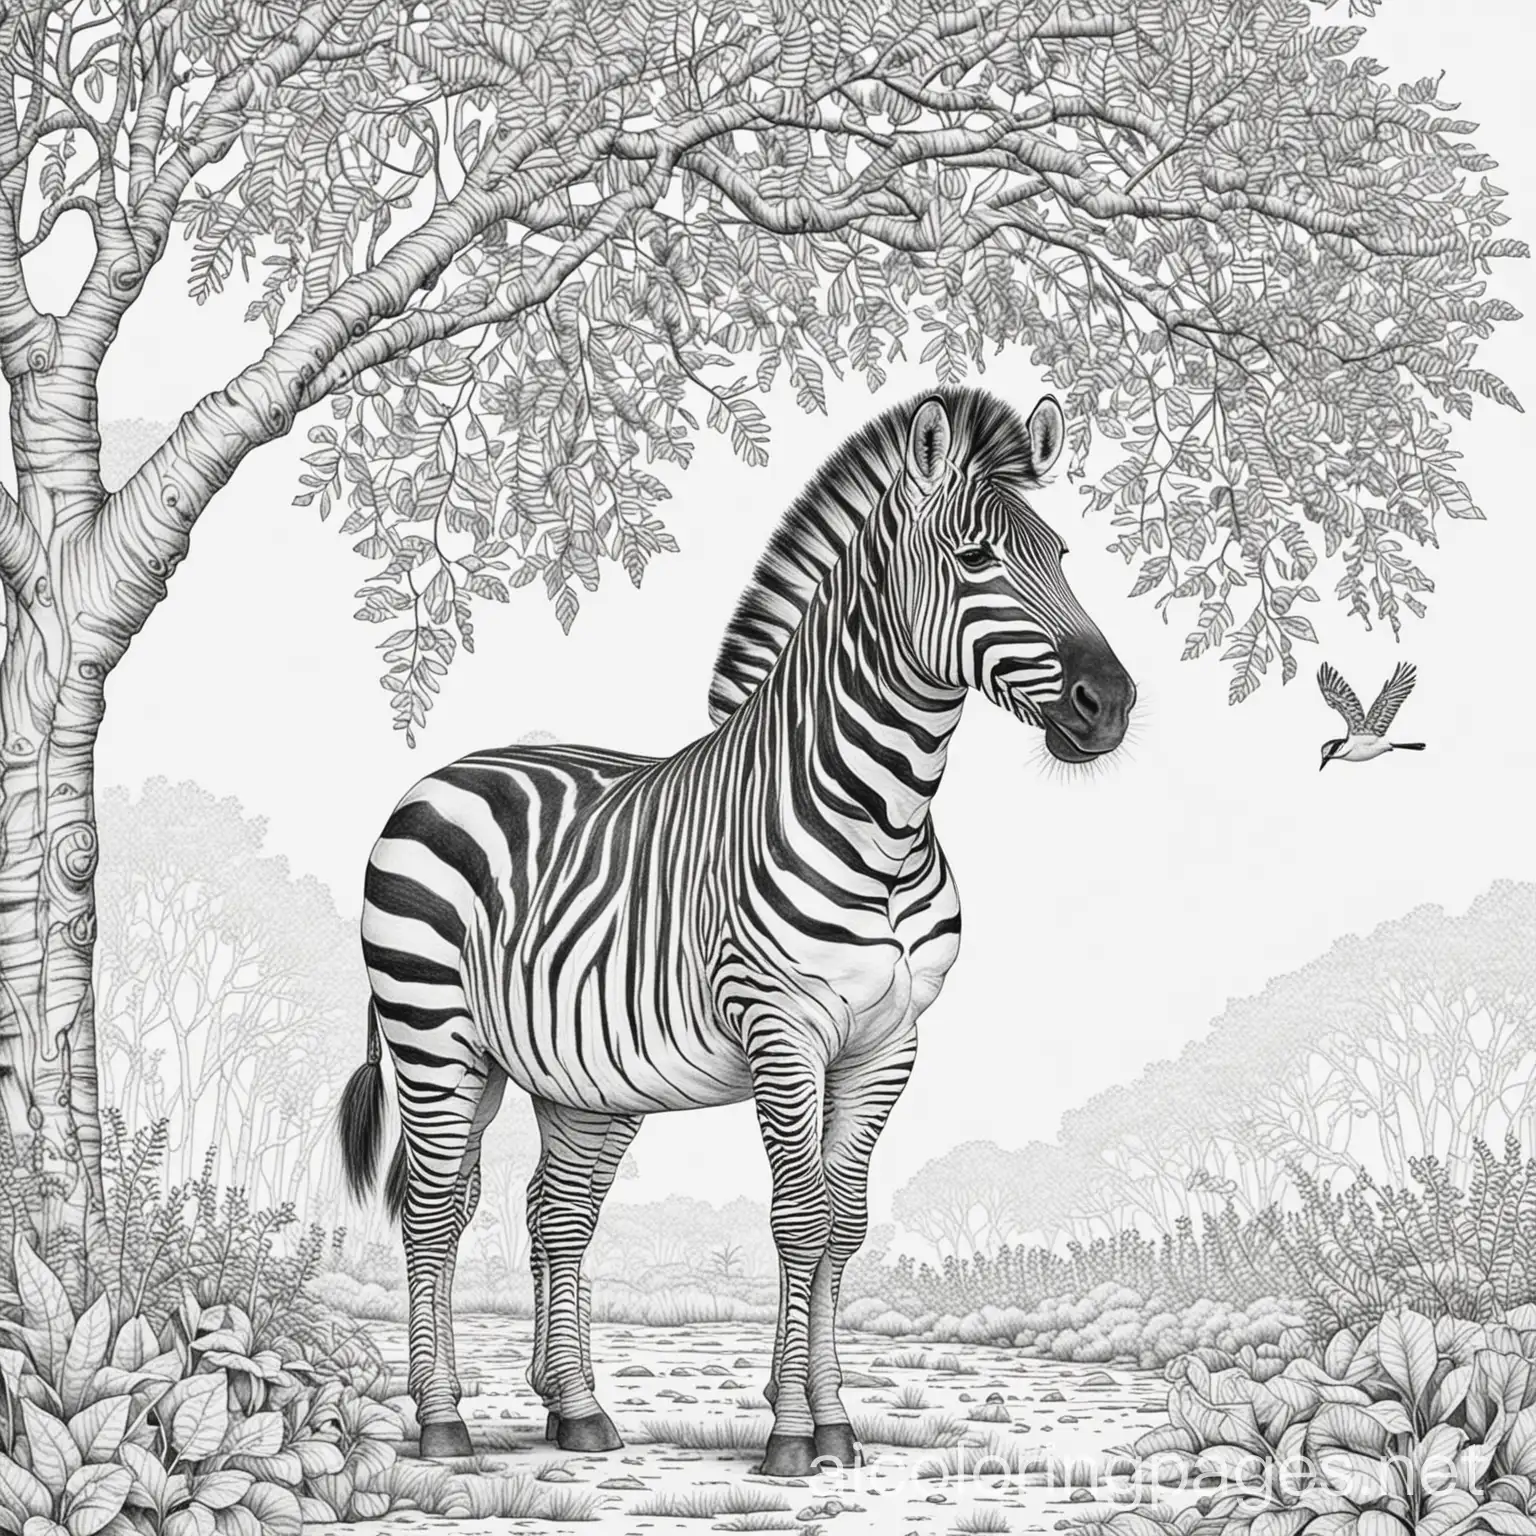 Zebra and have a tress with birds, Coloring Page, black and white, line art, white background, Simplicity, Ample White Space. The background of the coloring page is plain white to make it easy for young children to color within the lines. The outlines of all the subjects are easy to distinguish, making it simple for kids to color without too much difficulty